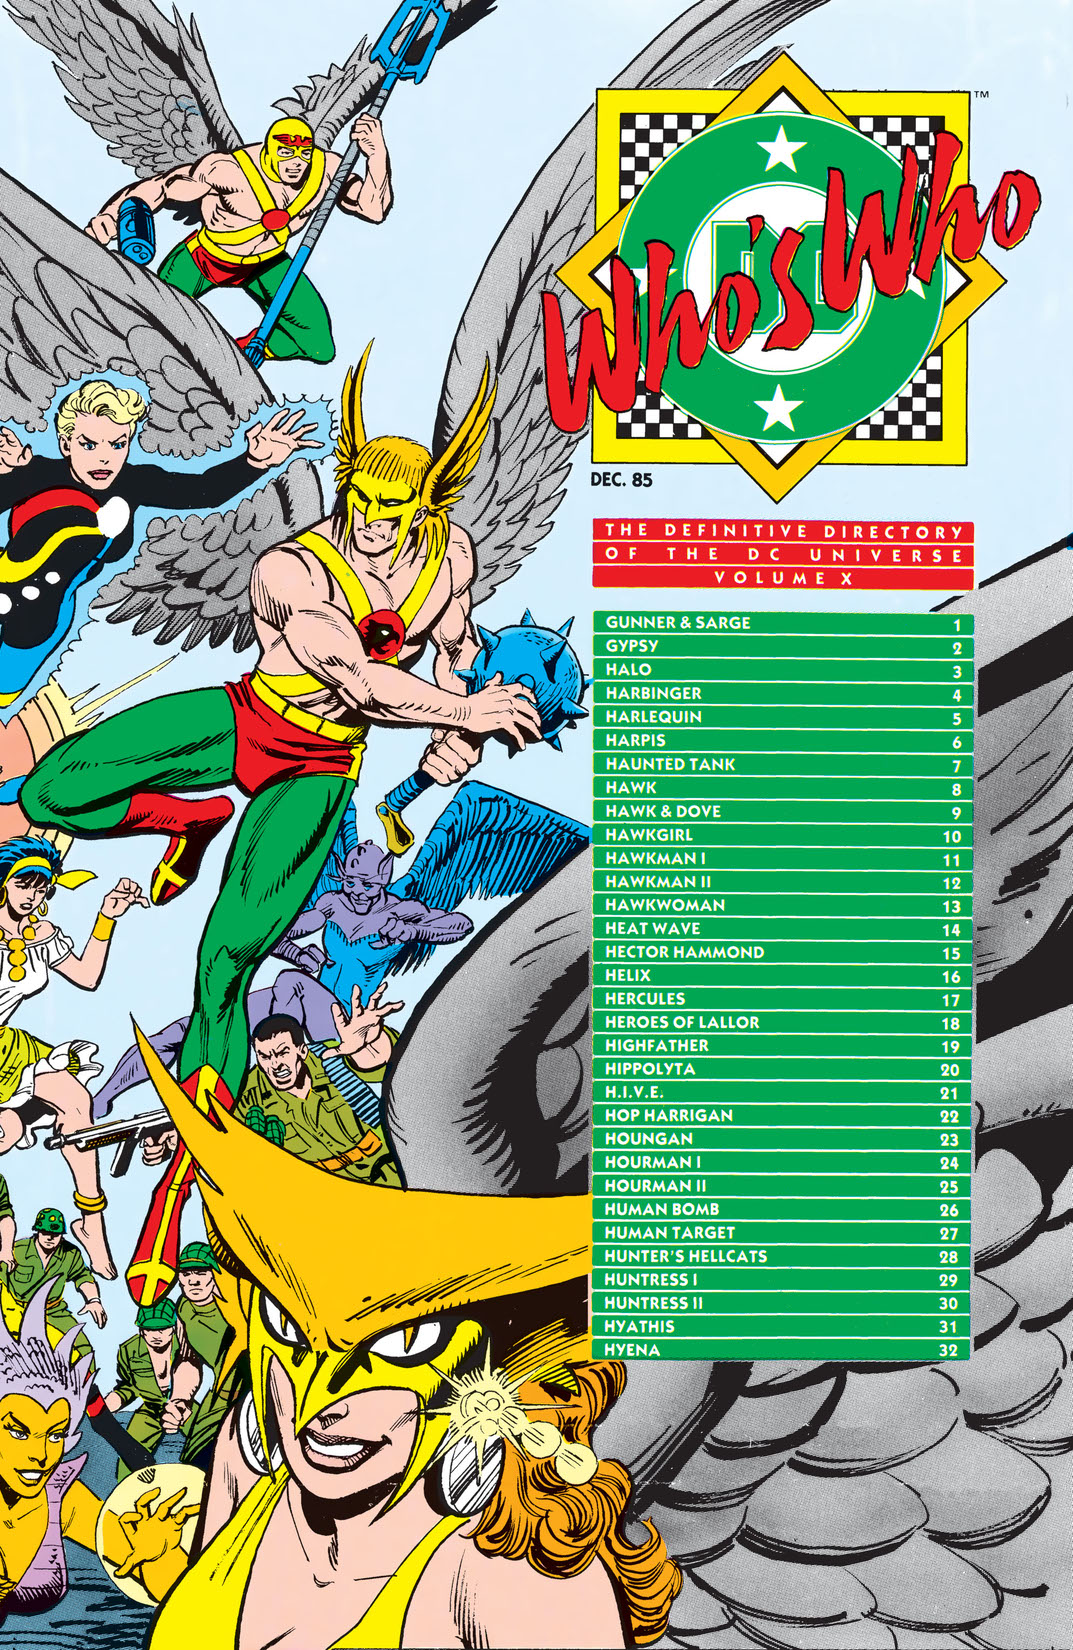 Who's Who: The Definitive Directory of the DC Universe #10 preview images